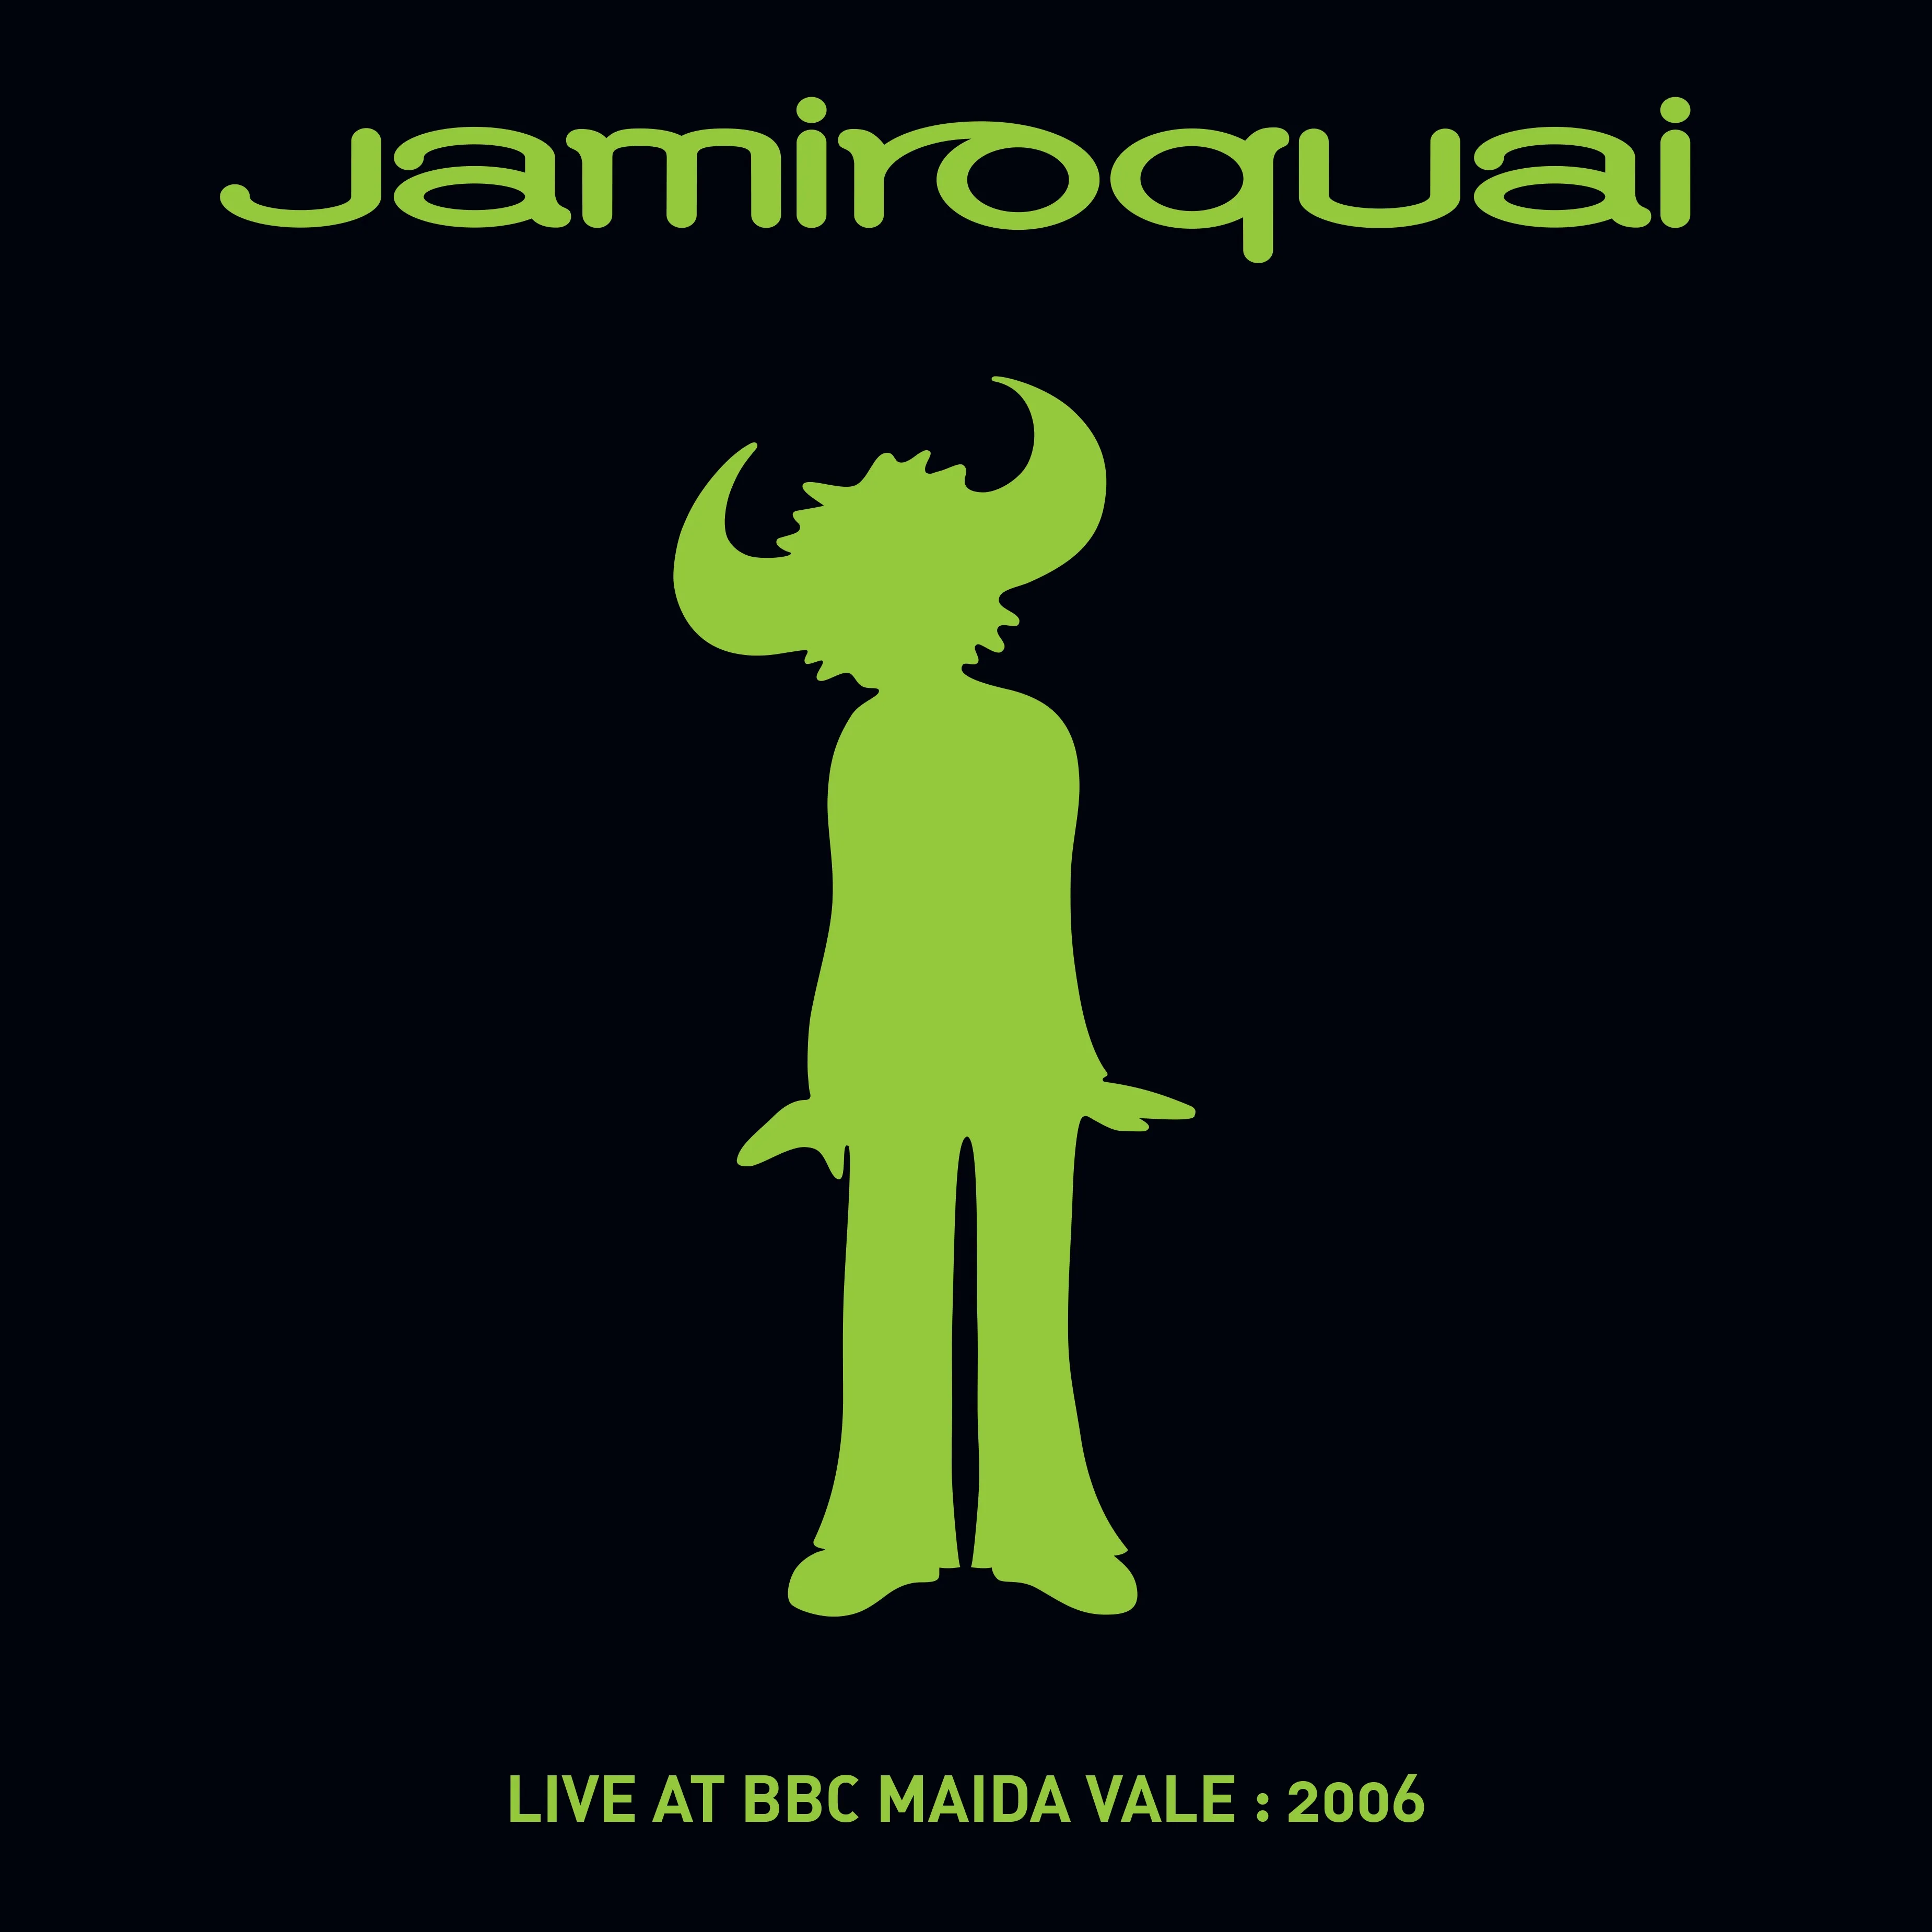 RECORD STORE DAY 2021.6.12 JAMIROQUAI / LIVE AT MAIDA VALE (12INCH NEON GREEN VINYL FOR RSD)